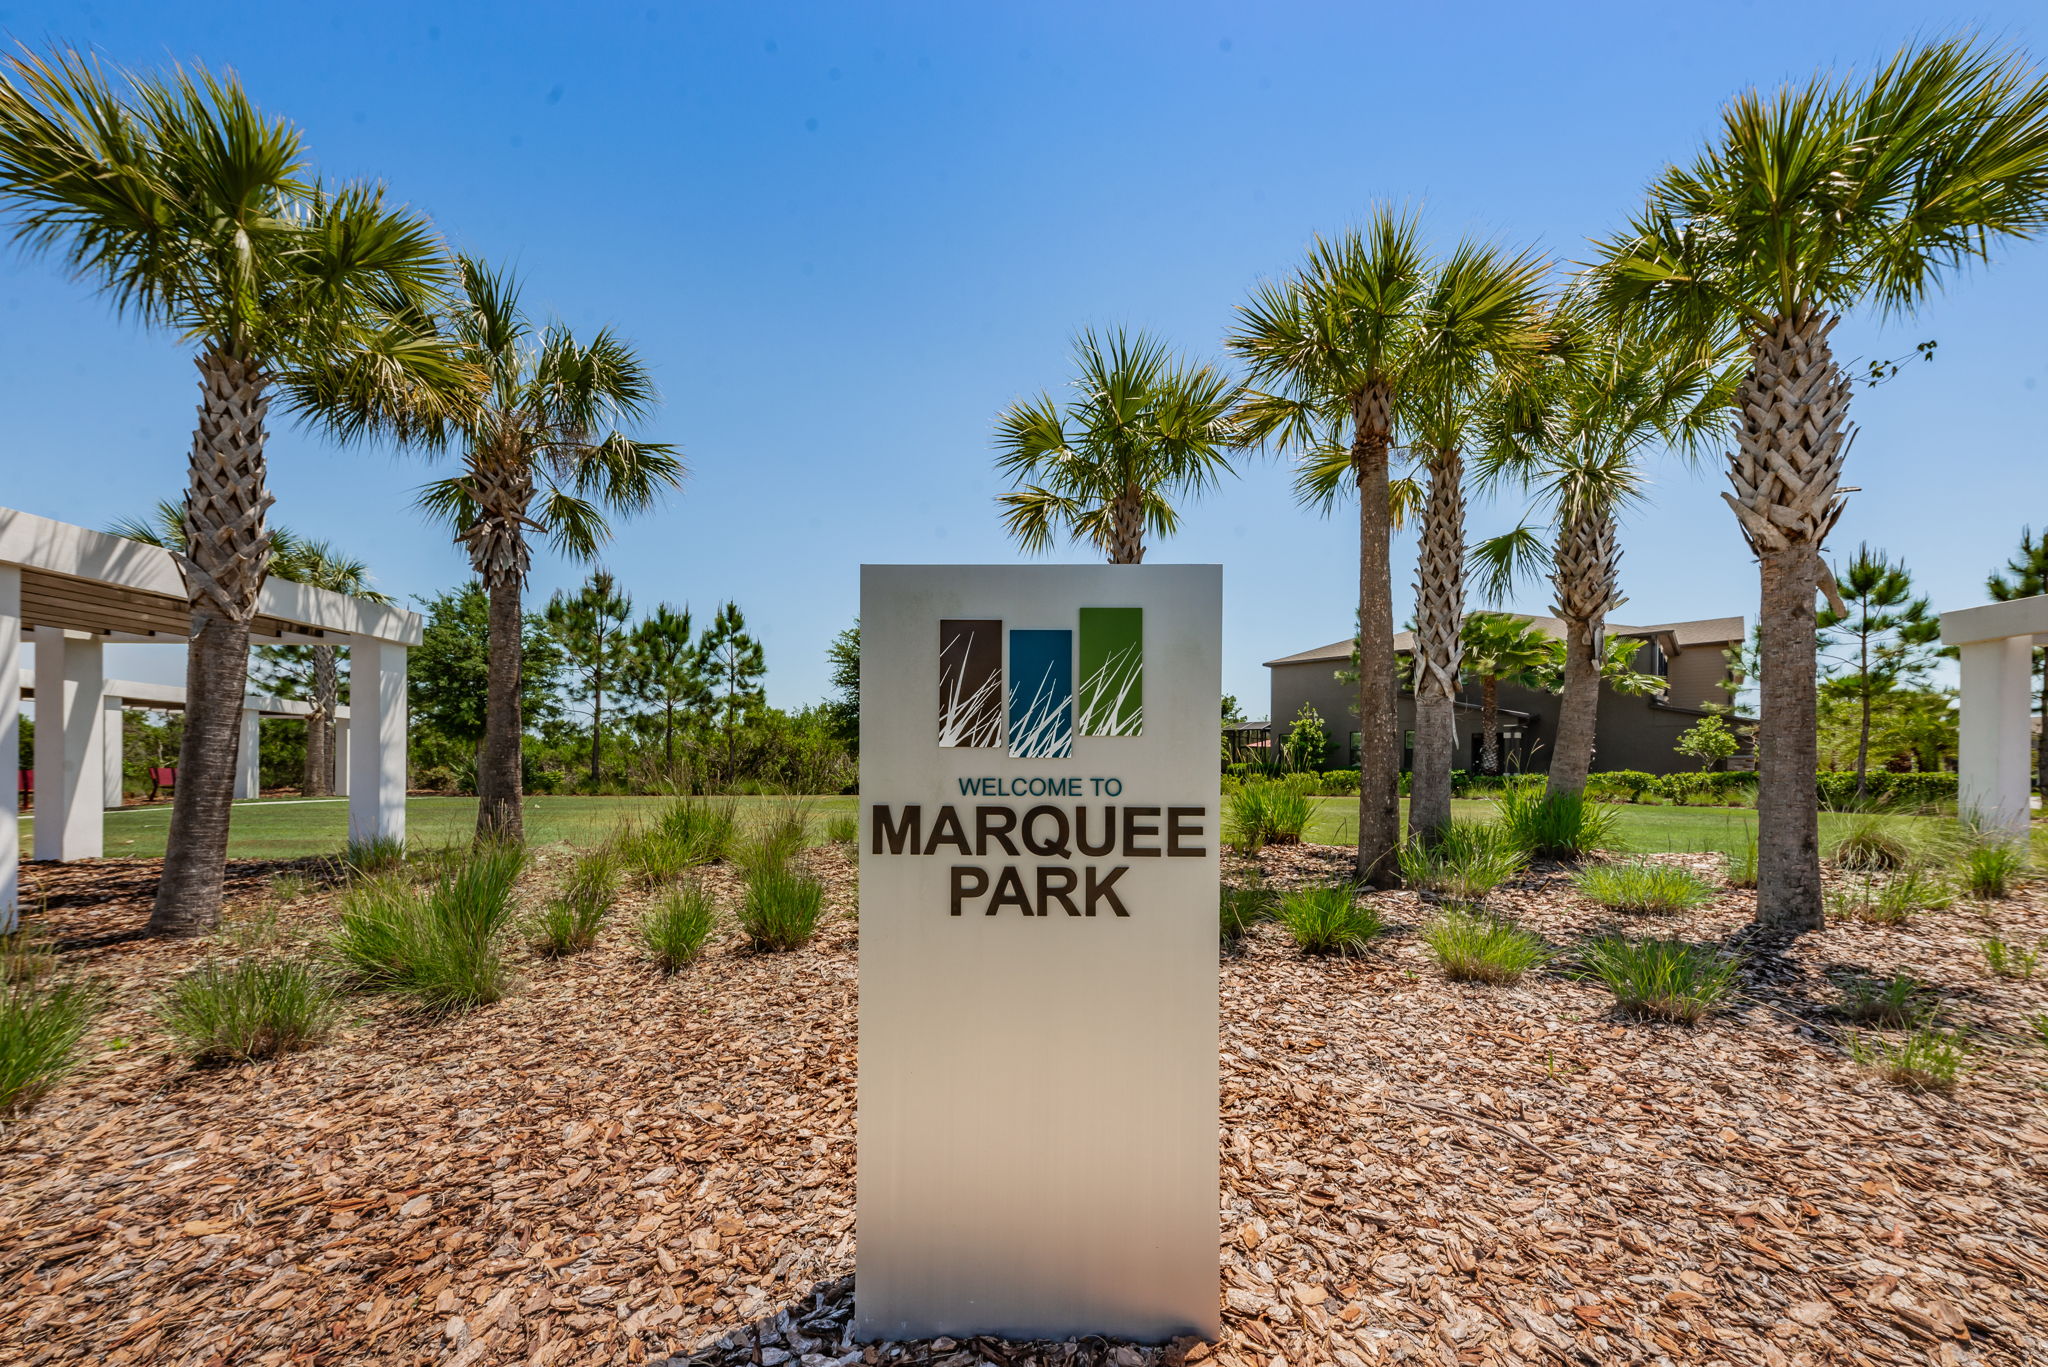 3-Marquee Park